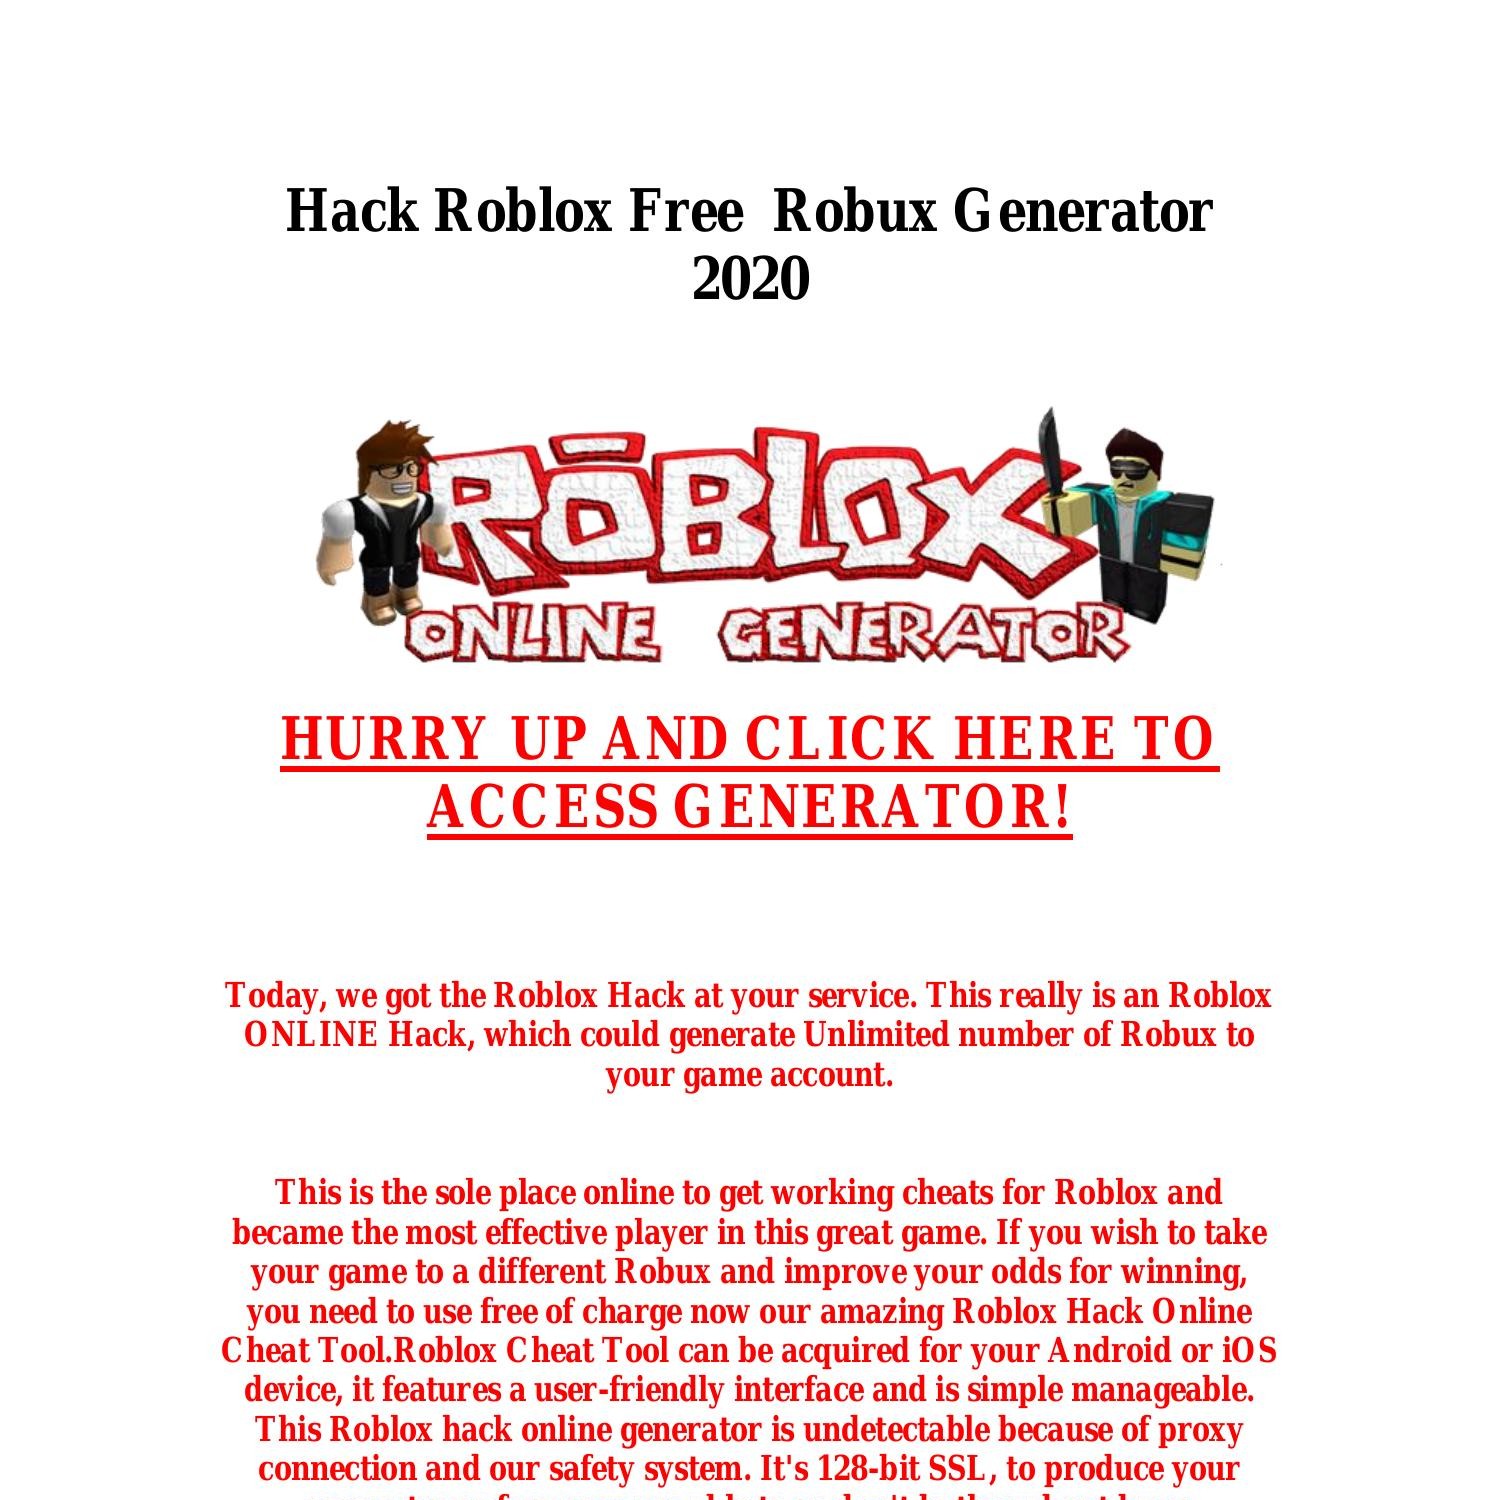 Hack Roblox Free Robux Generator 2020 Converted Pdf Docdroid - how do you hack roblox 2020